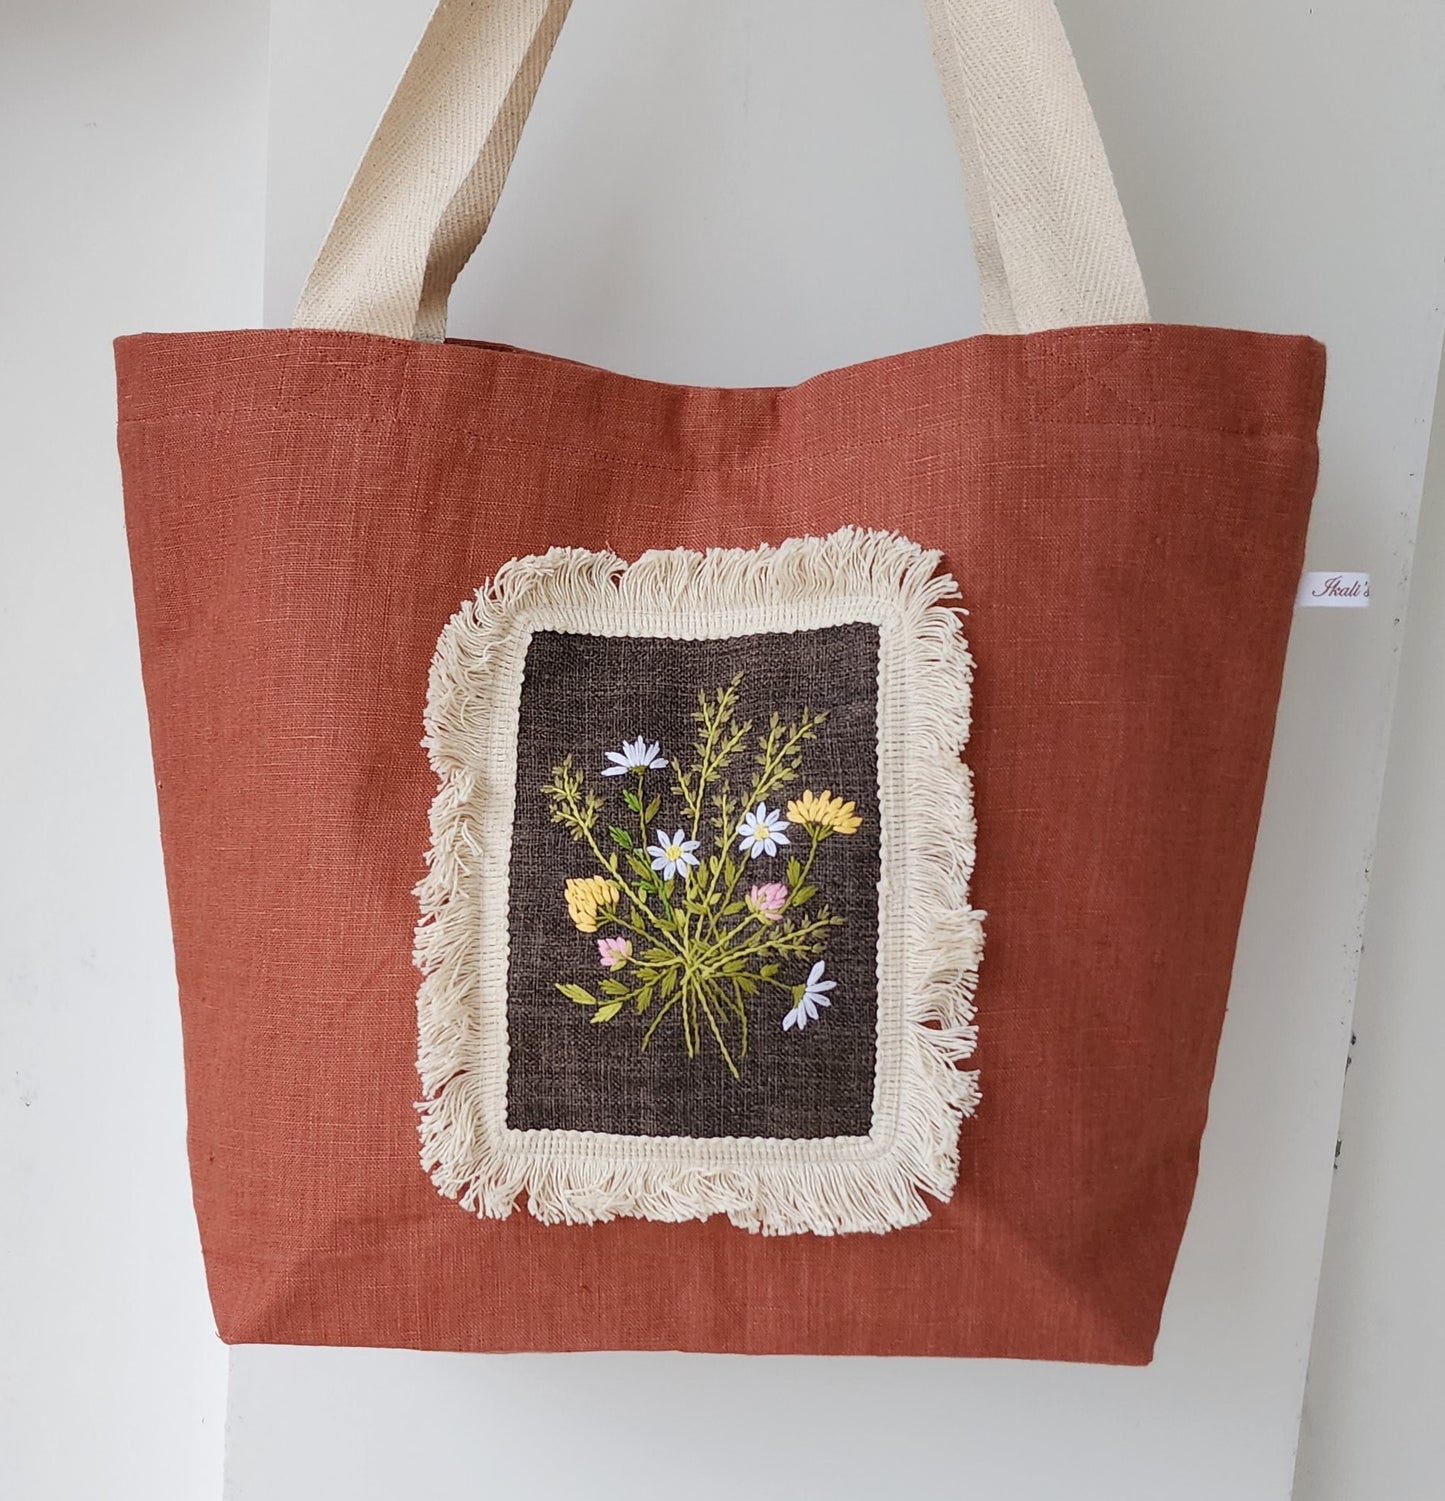 Ikali - Flower Bouquet - Hand-embroidered Tote